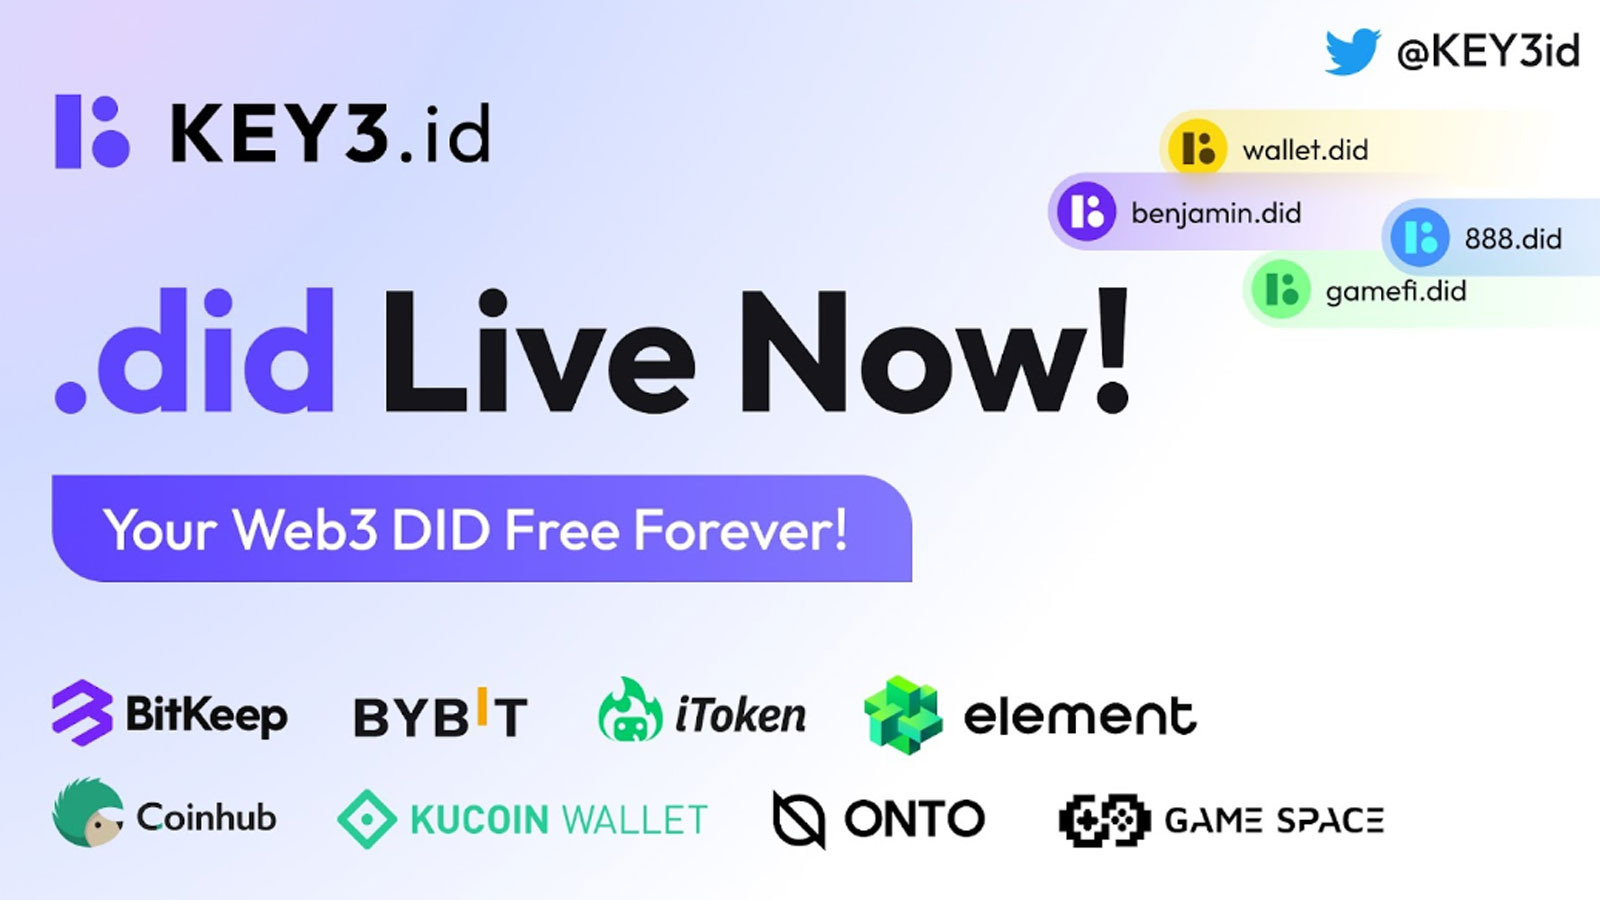 KEY3.id Goes Live Today! Aligned Partnership with Bitkeep and 8 Other Wallets With Over 16,000 Early Bird Participants